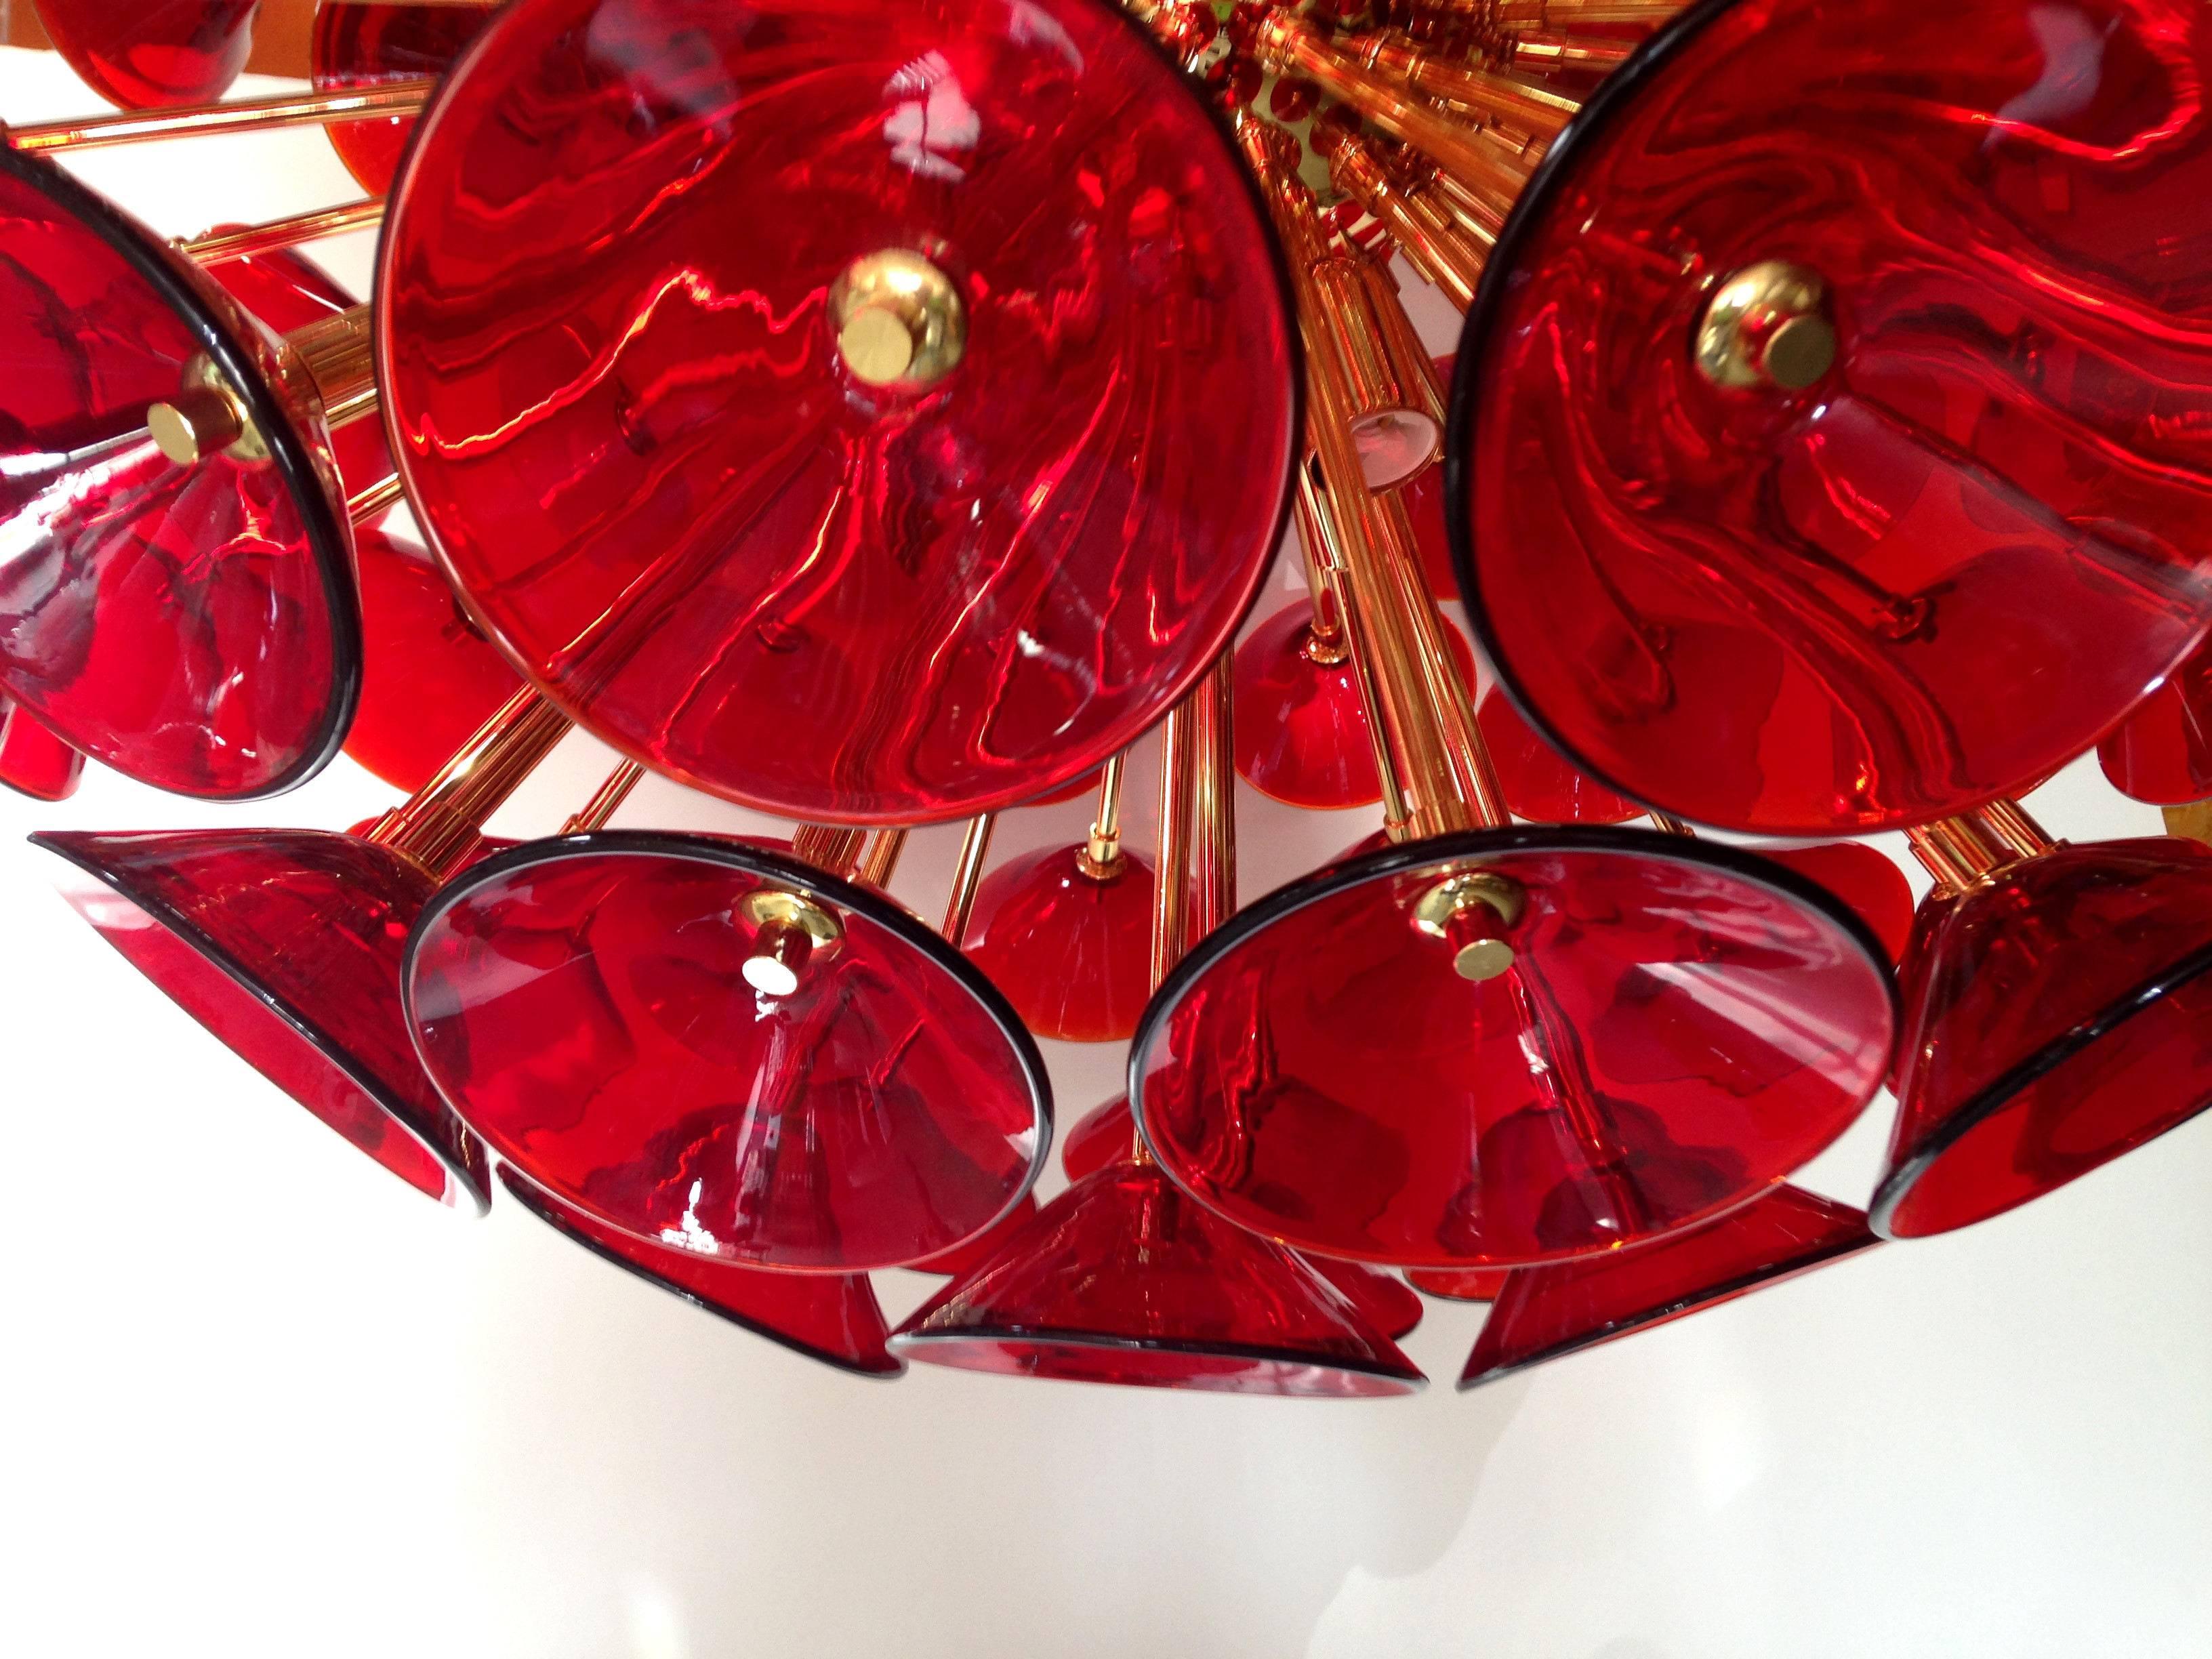 Vintage sputnik chandelier with red Murano glass trumpets by Vistosi on new 24k gold metal finish frame by Fabio LTD / Made in Italy
Diameter: 29 inches / Height: 29 inches + chain
12 lights / E12 type / max 40W each
1 in stock in Palm Springs
Order